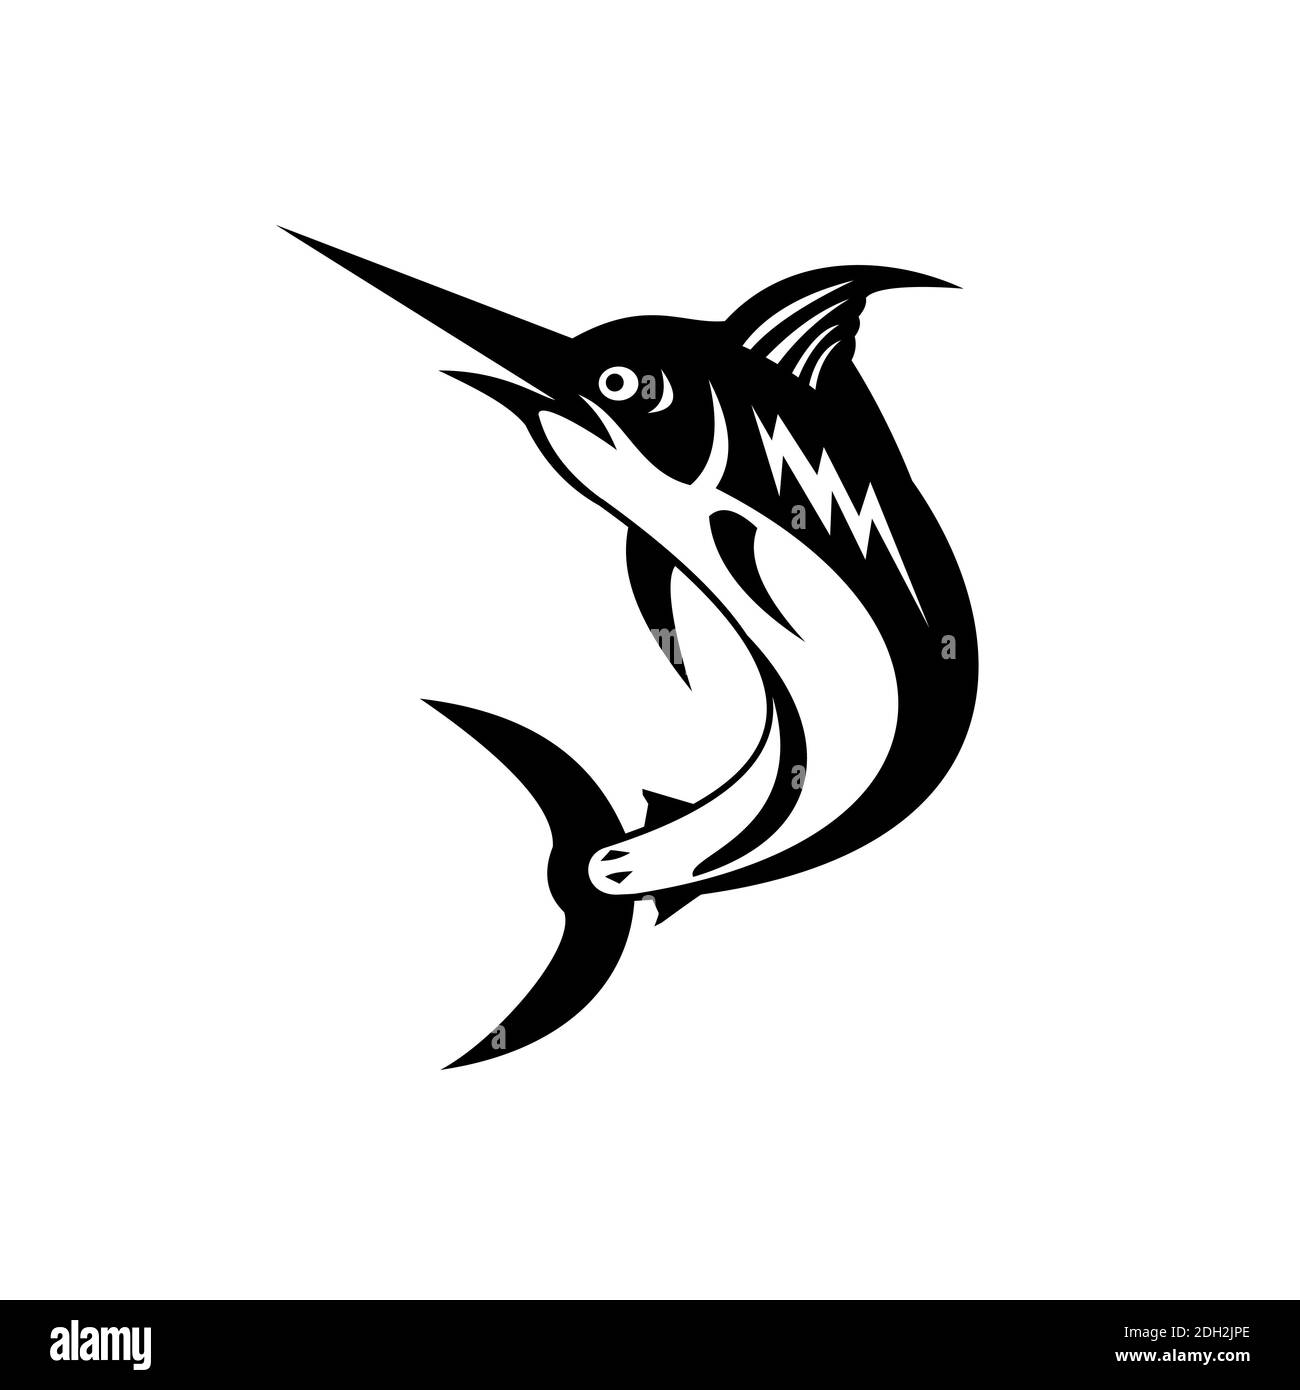 Blue Marlin Jumping Up Retro Black and White Stock Photo